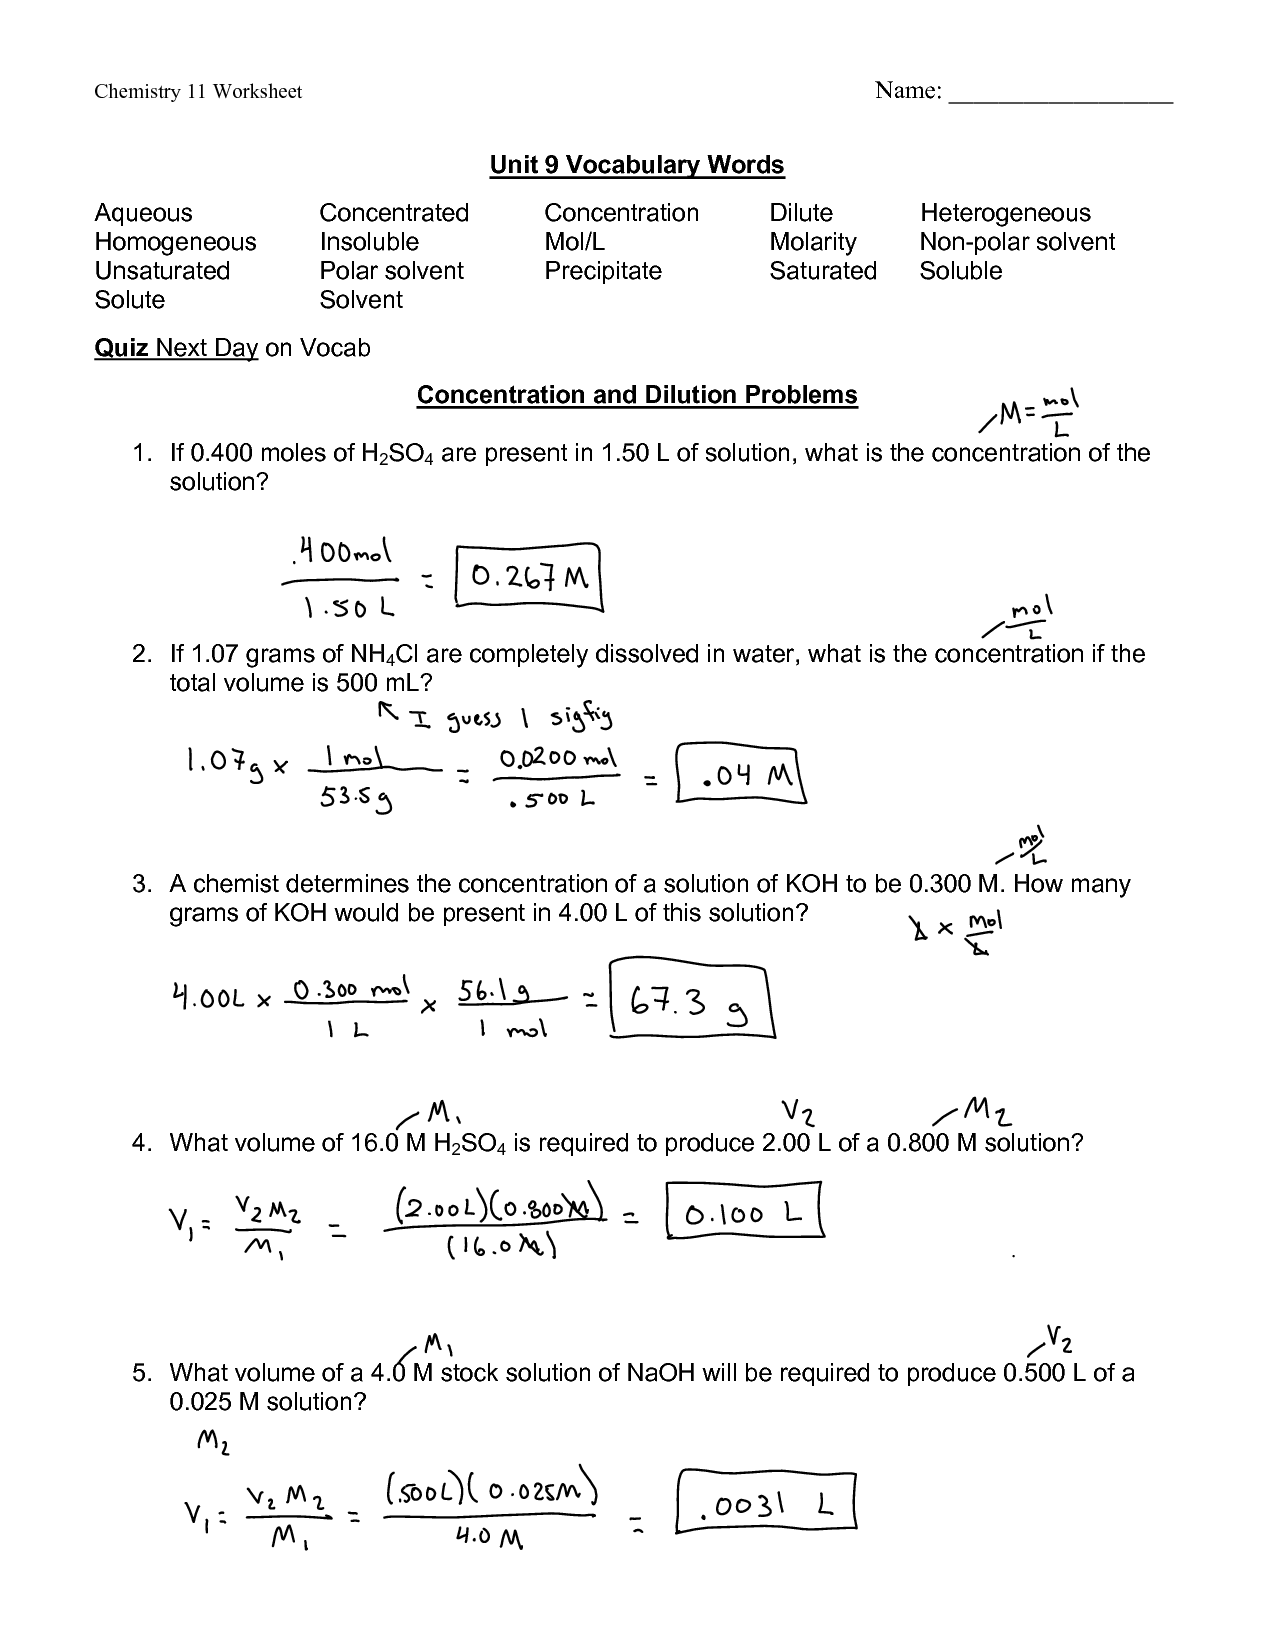 dilutions-worksheet